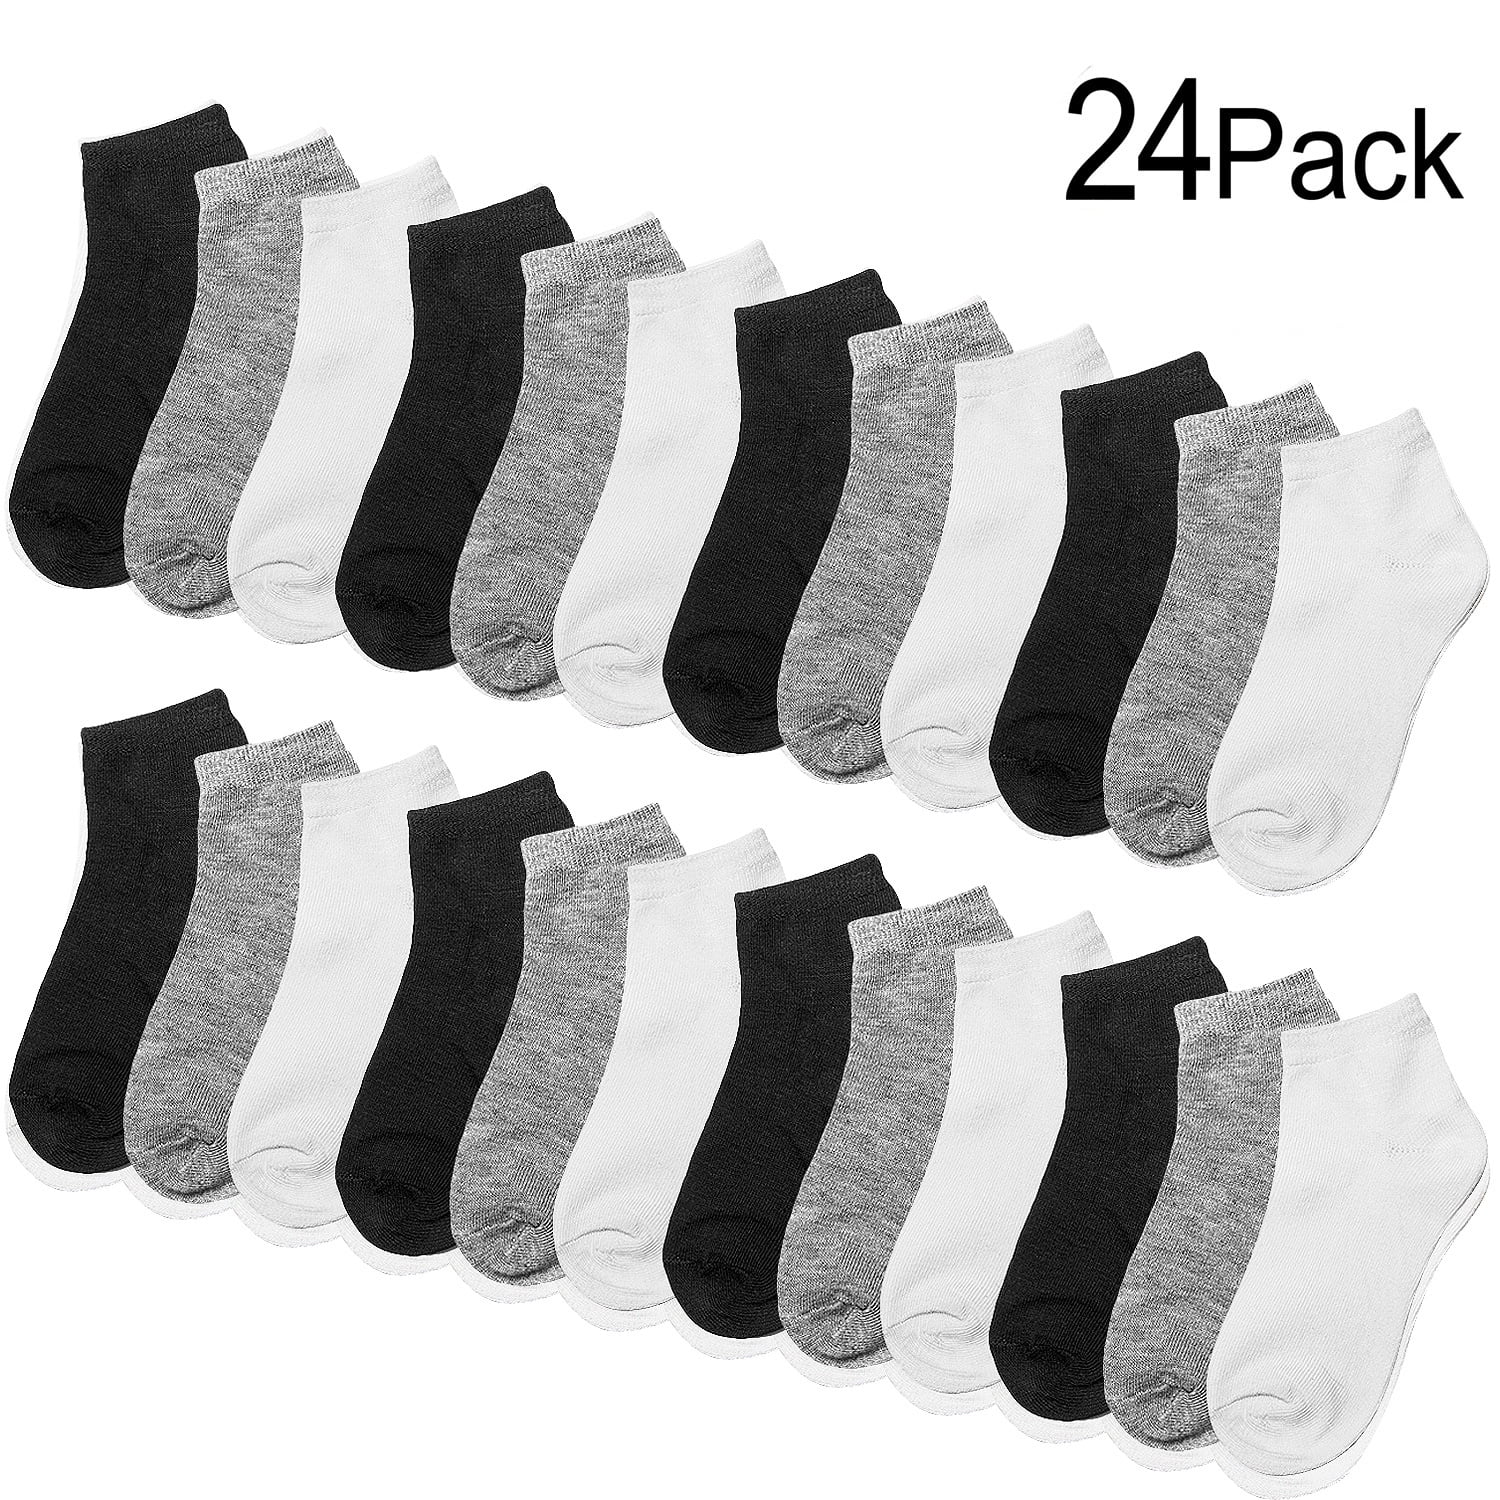 Kids Small Youth Solid Color Basketball Socks Sock Size 6-8 